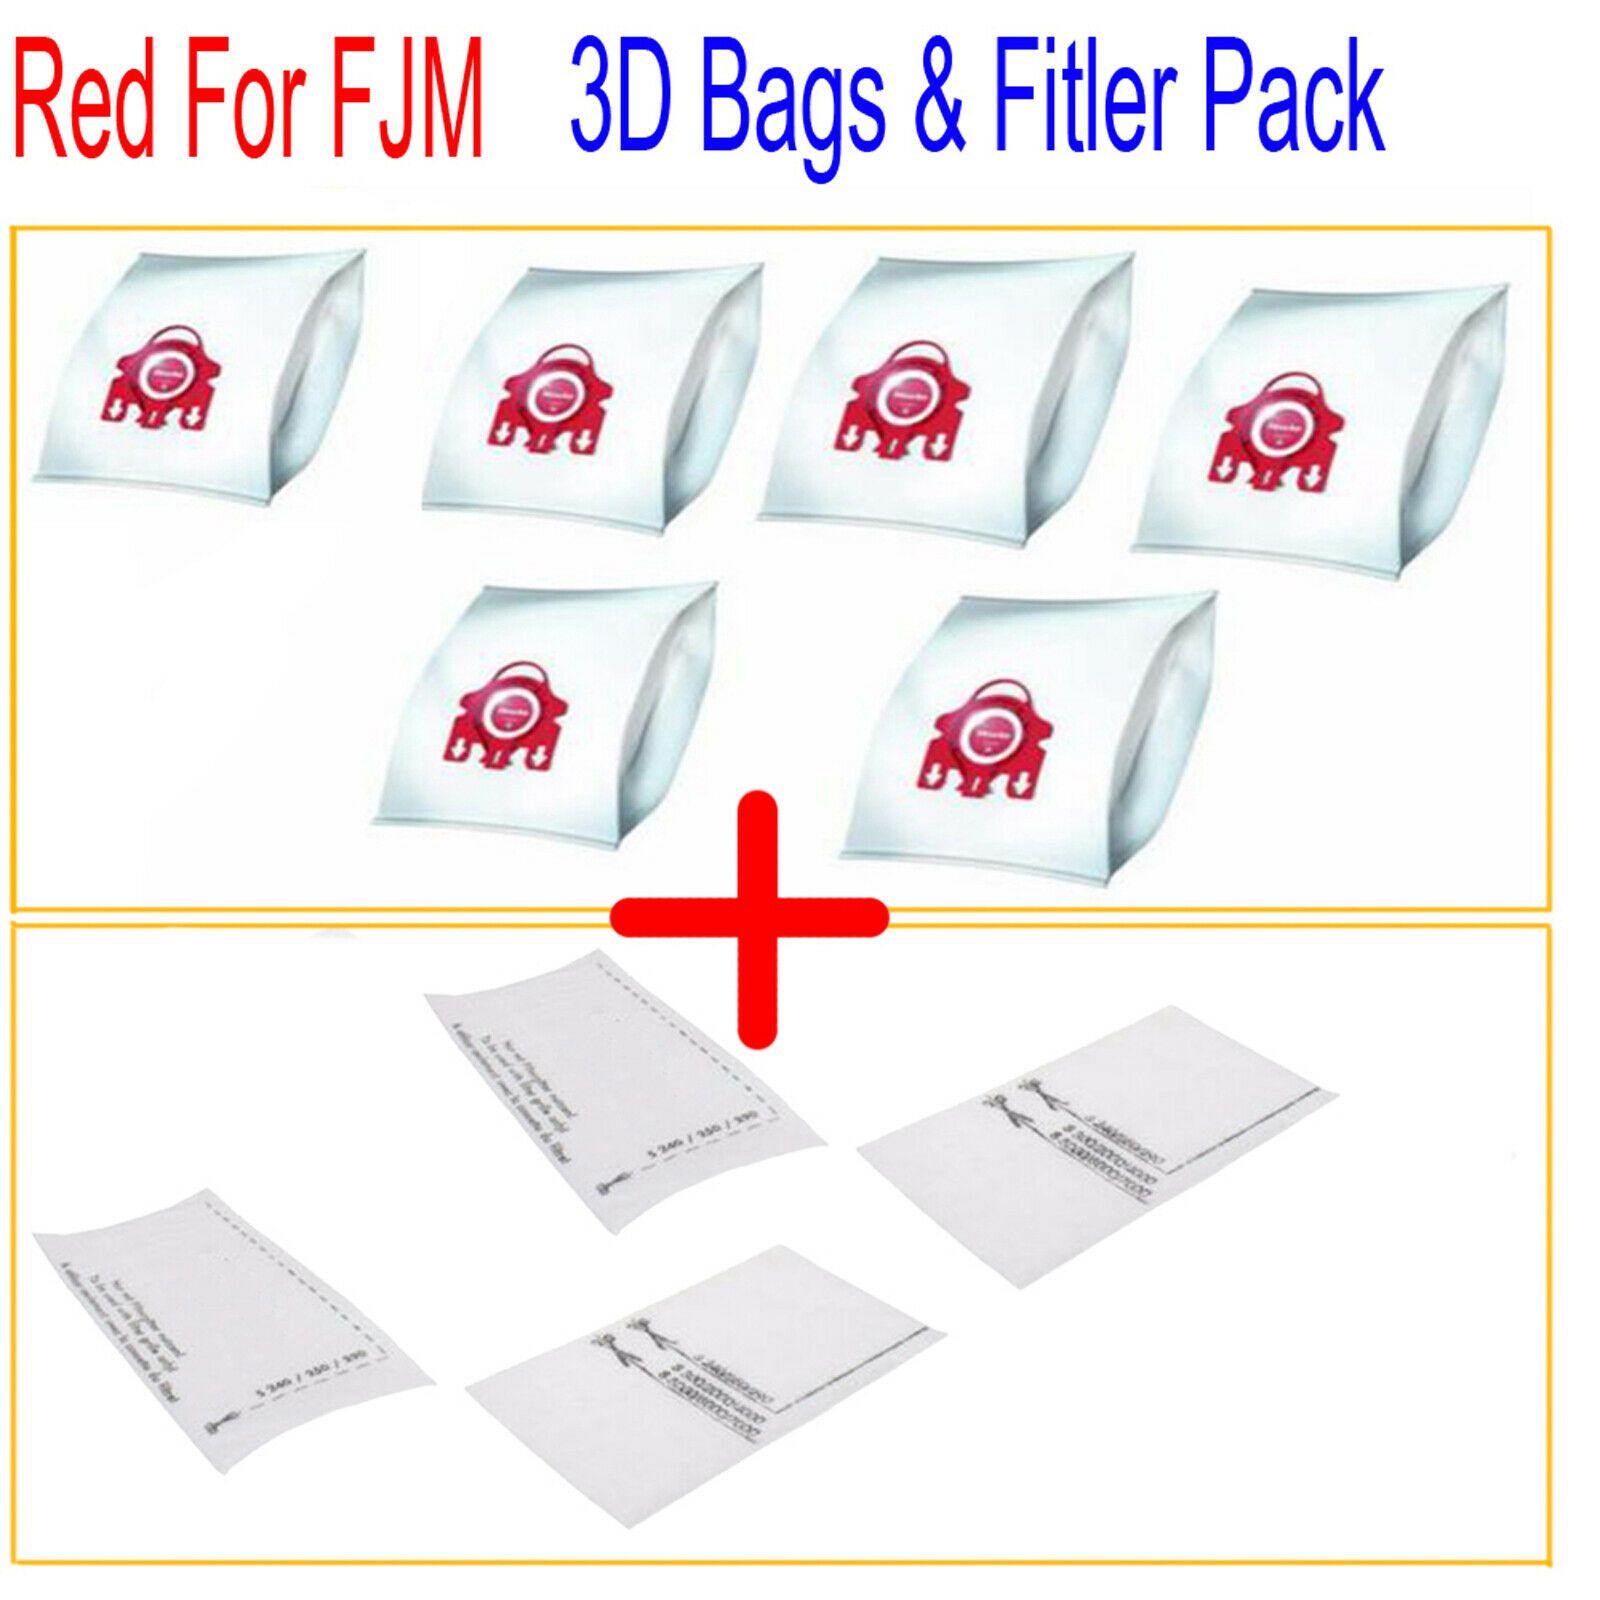 6X Synthetic Bags & 4 Filters For Miele 9917710 3D Efficiency Vaccum Cleaner Red Sparesbarn